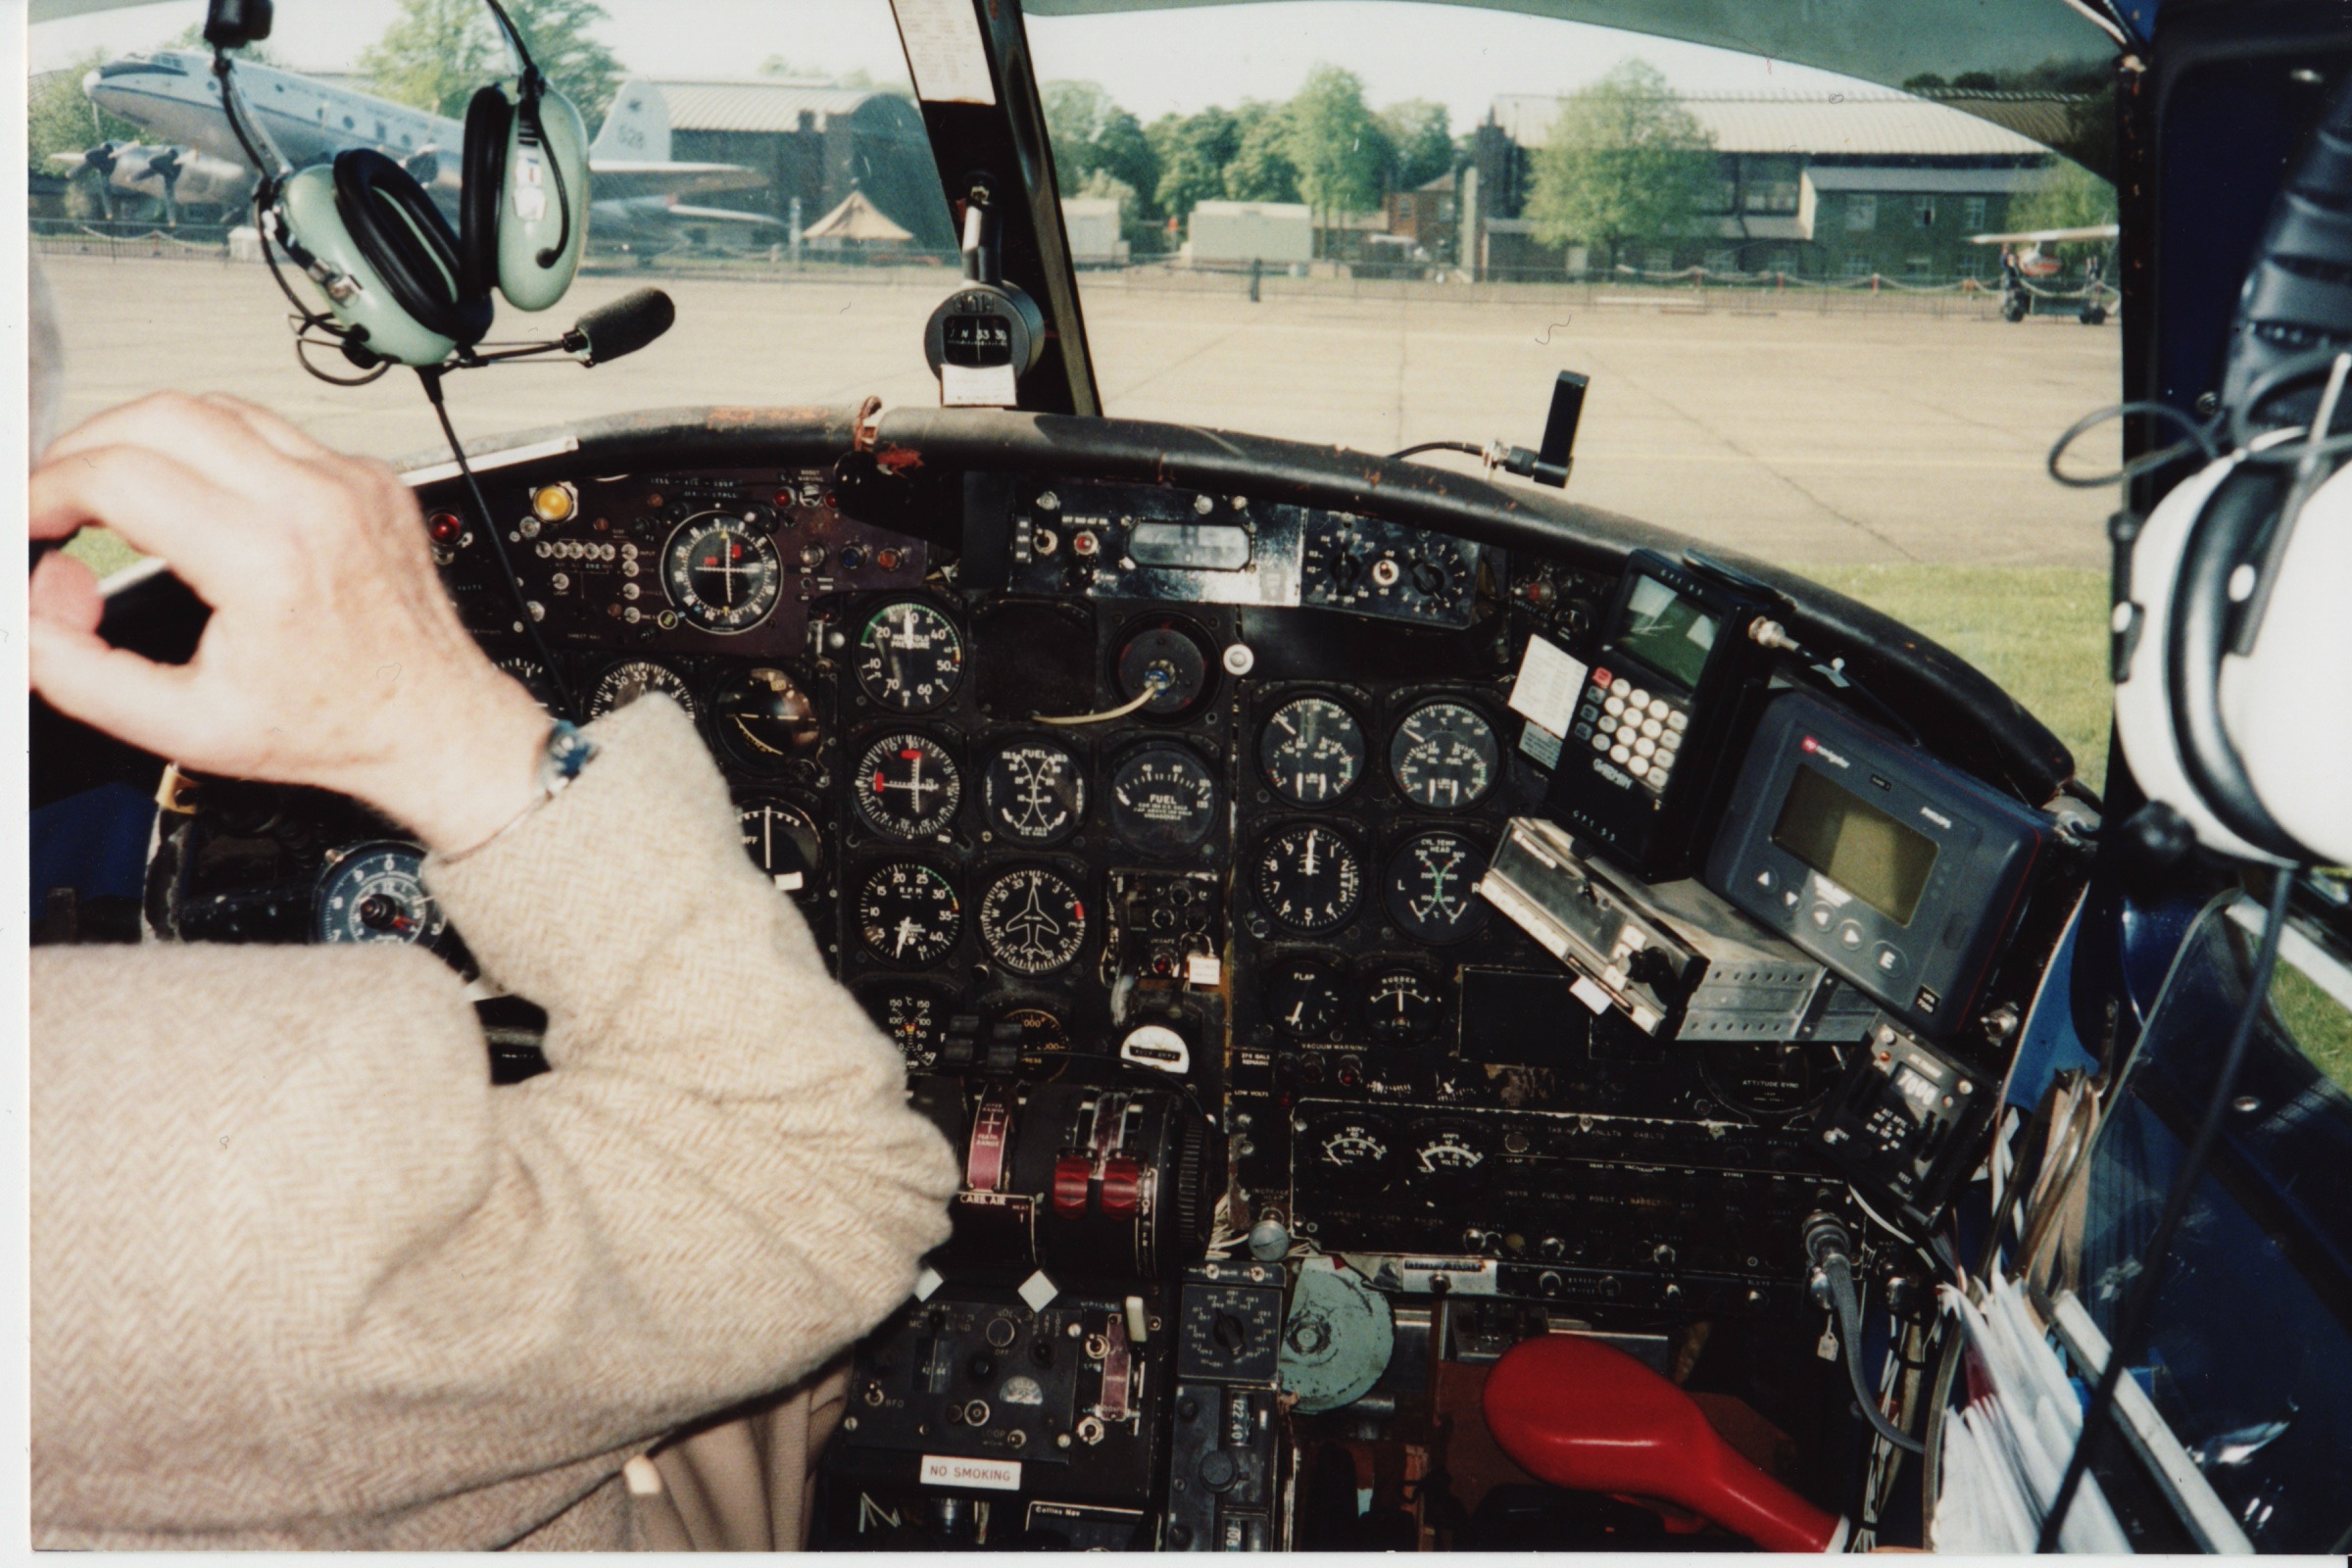 An old photo of the Royal Air Squadron member inside aircraft cockpit